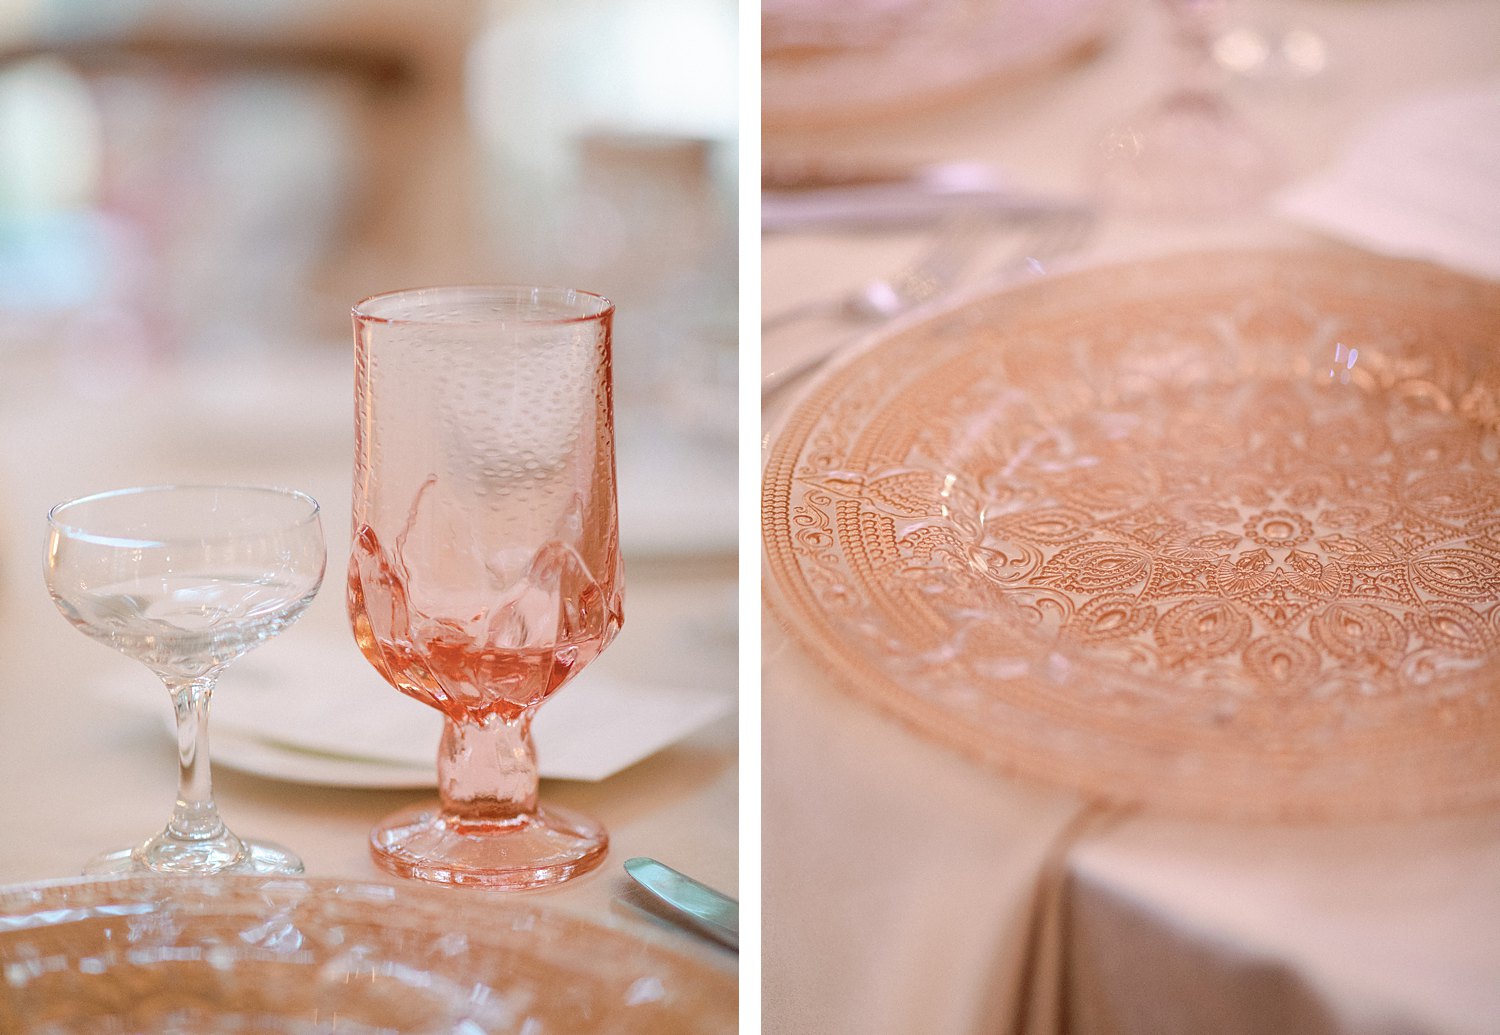 Orange wedding reception plate and glass on table